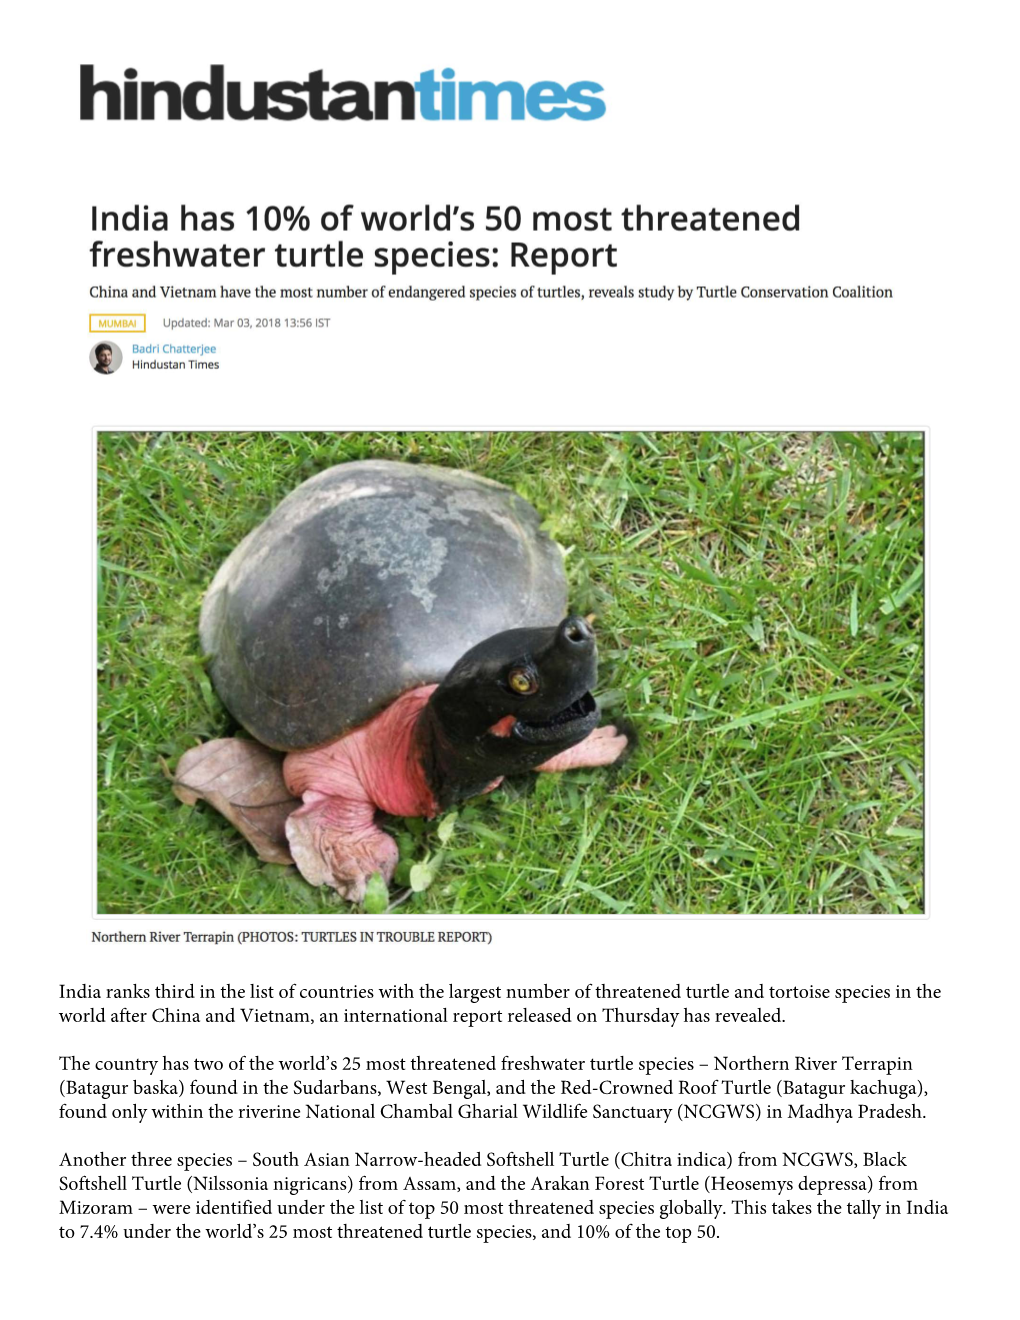 India Ranks Third in the List of Countries with the Largest Number of Threatened Turtle and Tortoise Species in the World After